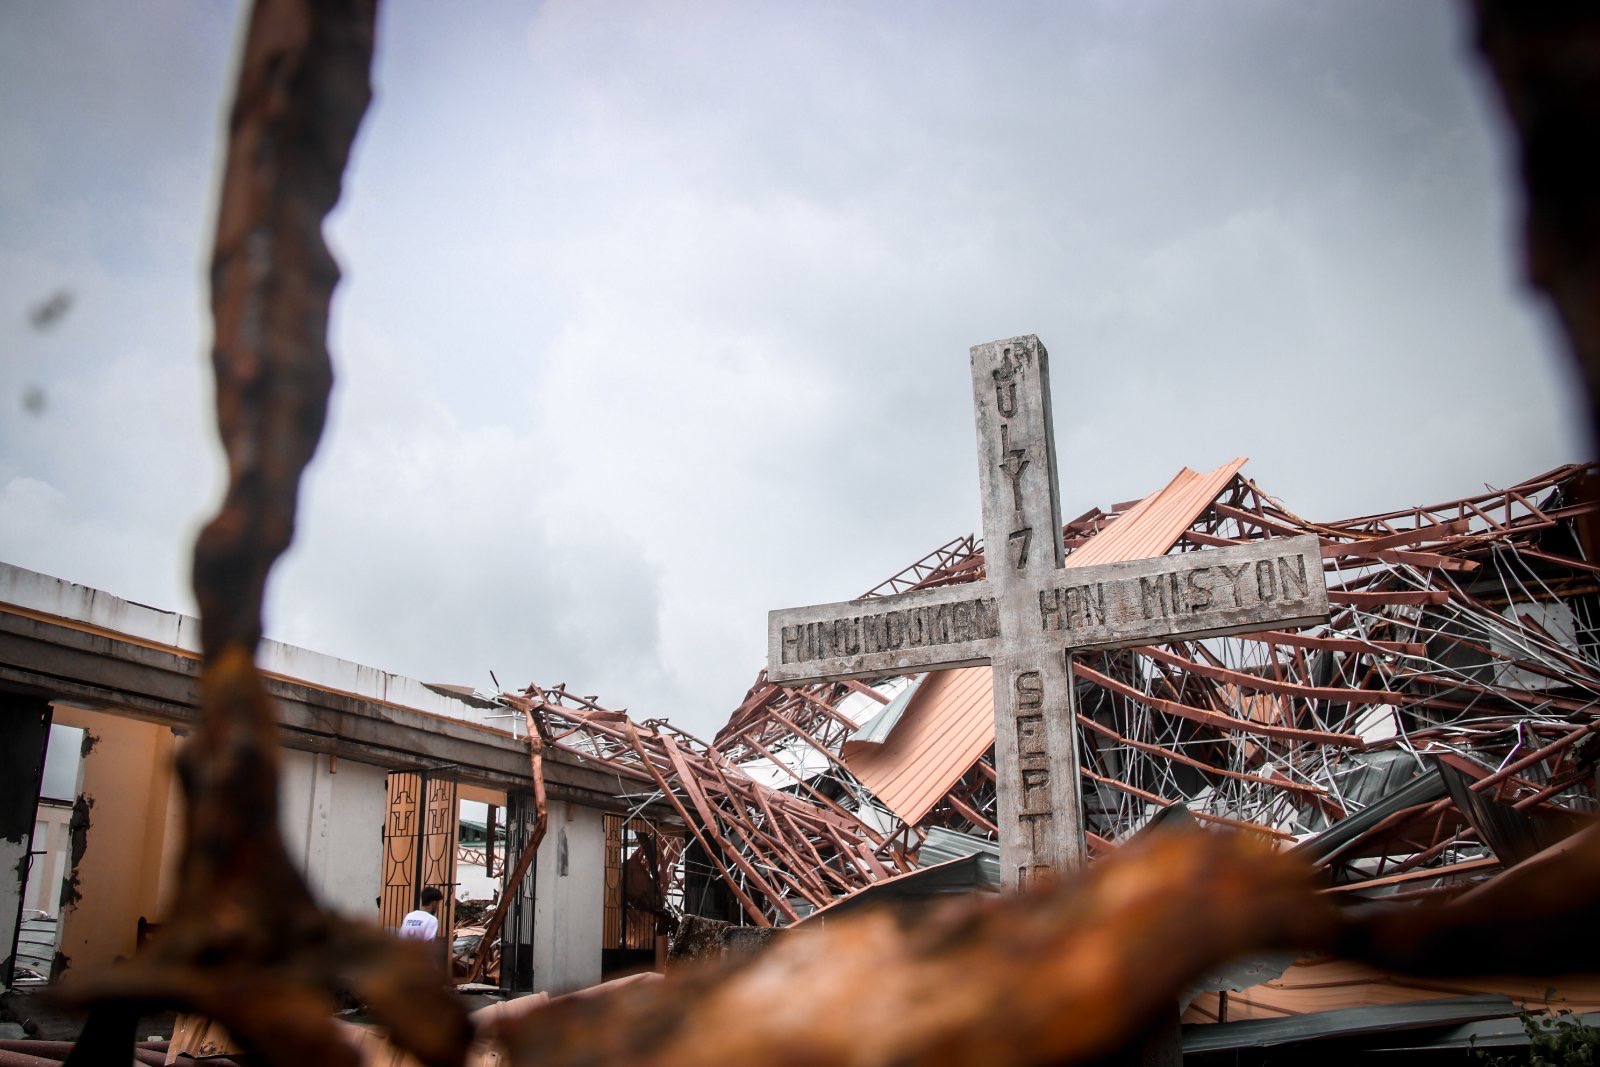 HARDEST HIT A solitary cross stands amid the debris of this roofless Catholic church in Arteche, Eastern Samar, the province hardest hit by Typhoon “Ambo” (international name: Vongfong). Ambo’s gusts of up to 185 kilometers per hour when it made landfall on the province on Thursday tore off the roof, leaving grey rain clouds hovering above the church dedicated to St. Raymond Nonnatus, patron saint of pregnant women. —PHOTO COURTESY OF EASTERN SAMAR GOV. BEN EVARDONE